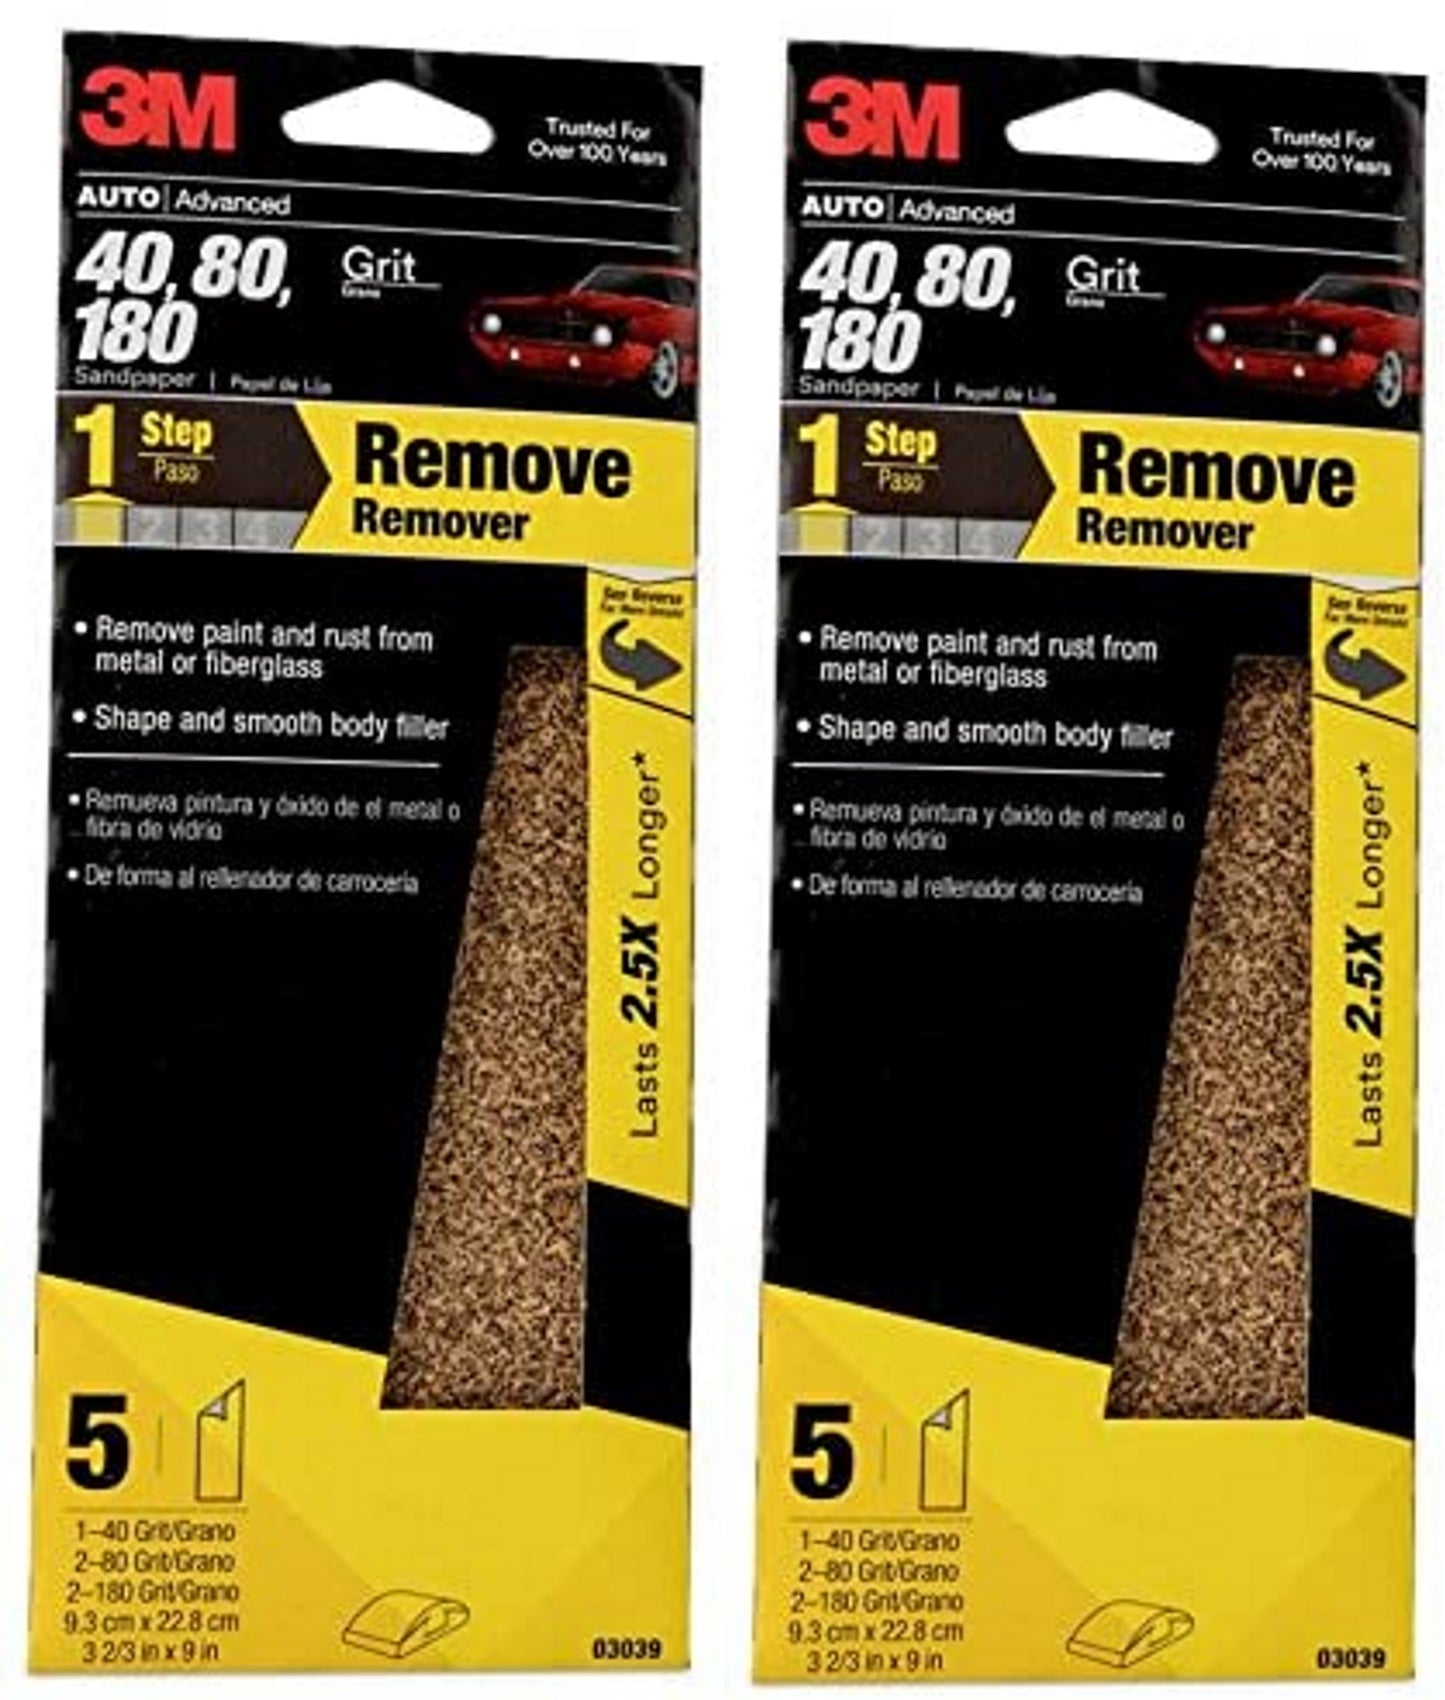 3M Auto Advanced Sandpaper, 40, 80, 120 Assorted Grits, 3 2/3 in x 9 in, 10 Sheets, Packaging May Vary - 2 Pack